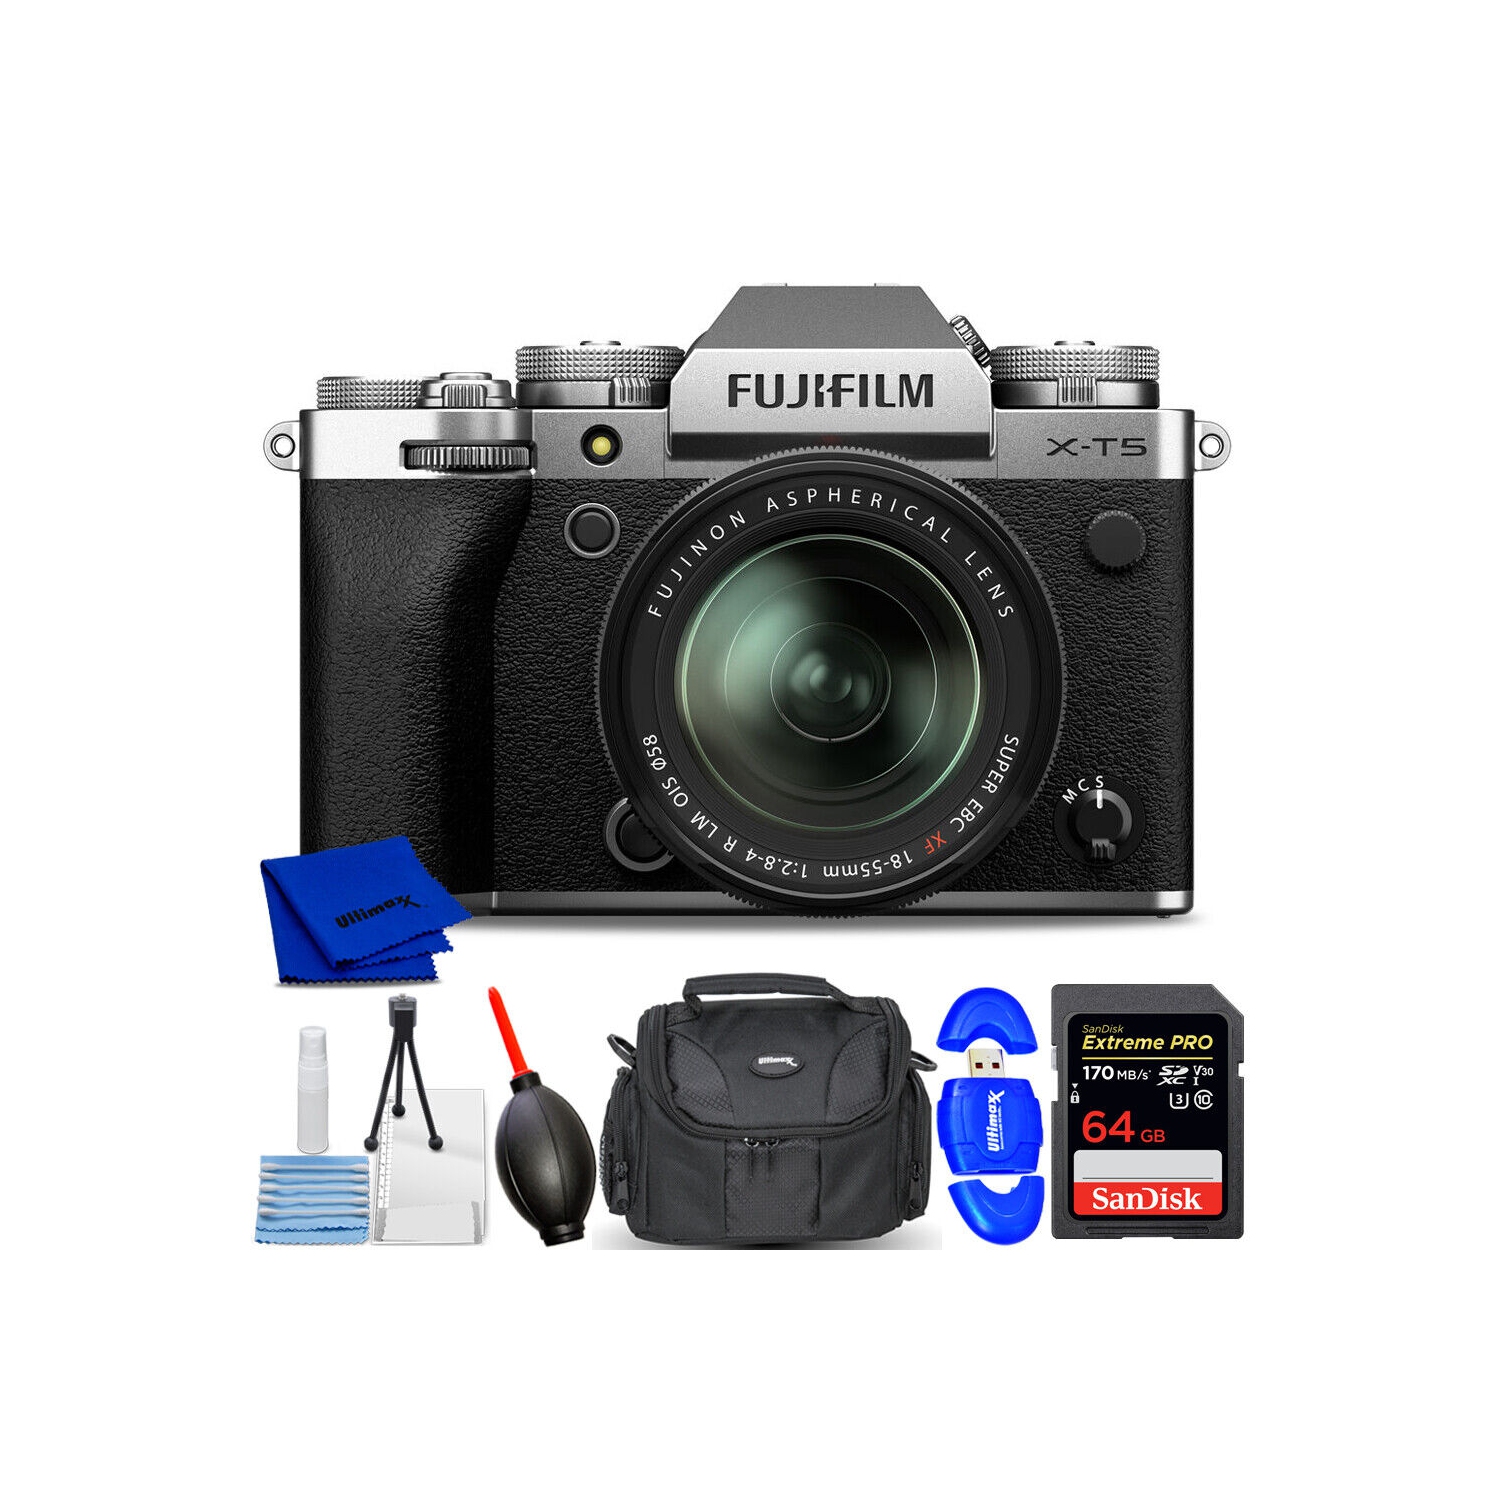 FUJIFILM X-T5 Mirrorless Camera with 18-55mm Lens Silver - 7PC Accessory Bundle